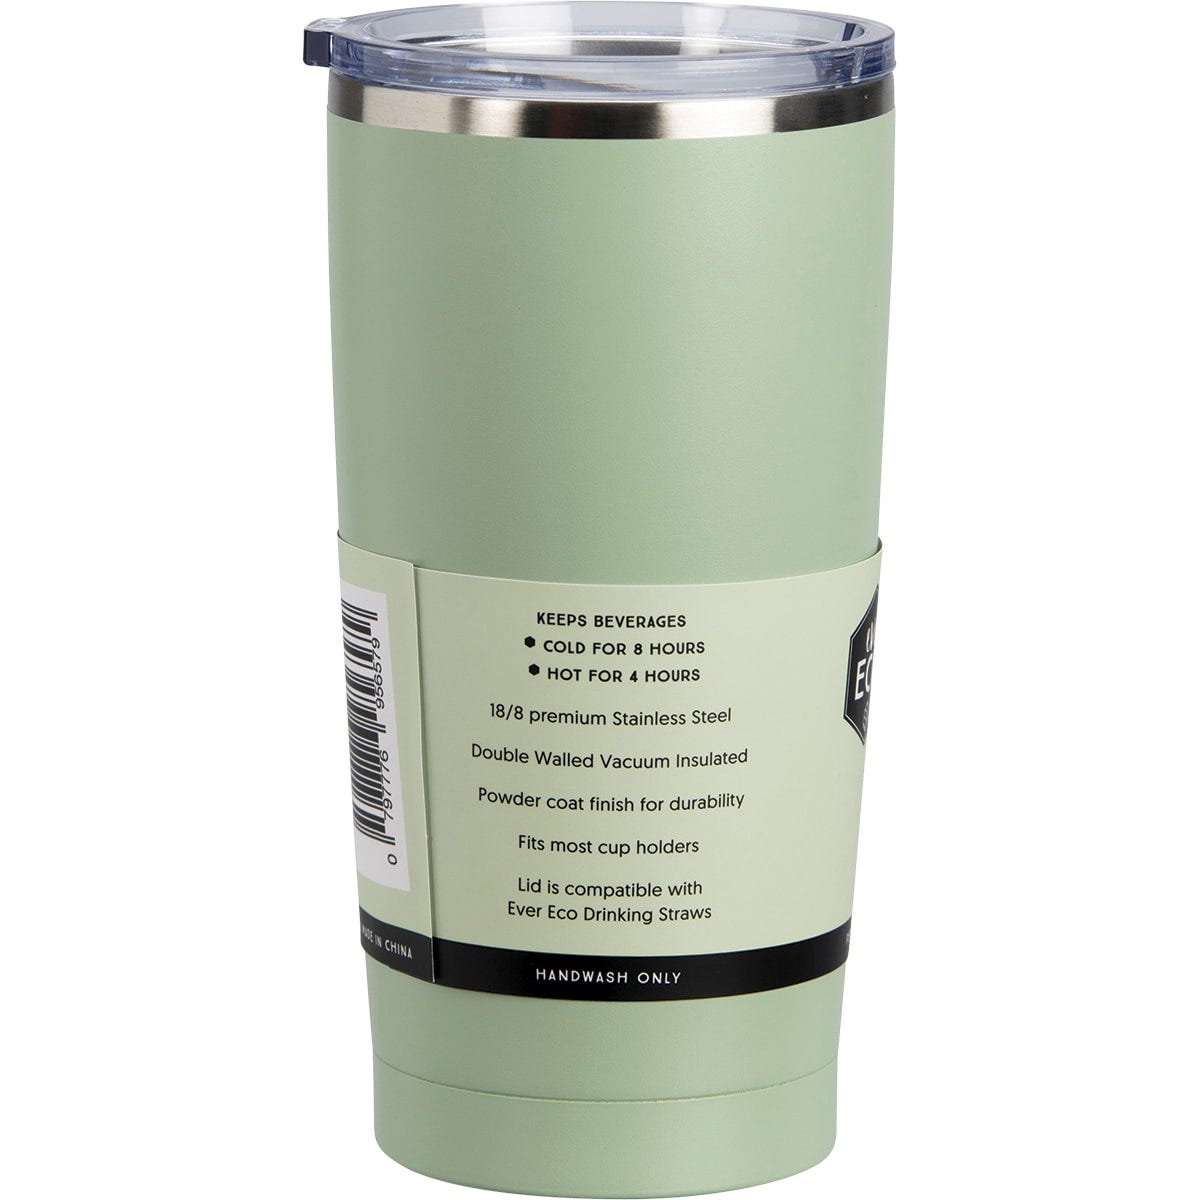 Ever Eco Insulated Tumbler Sage 592ml - Dr Earth - Cups & Tumblers